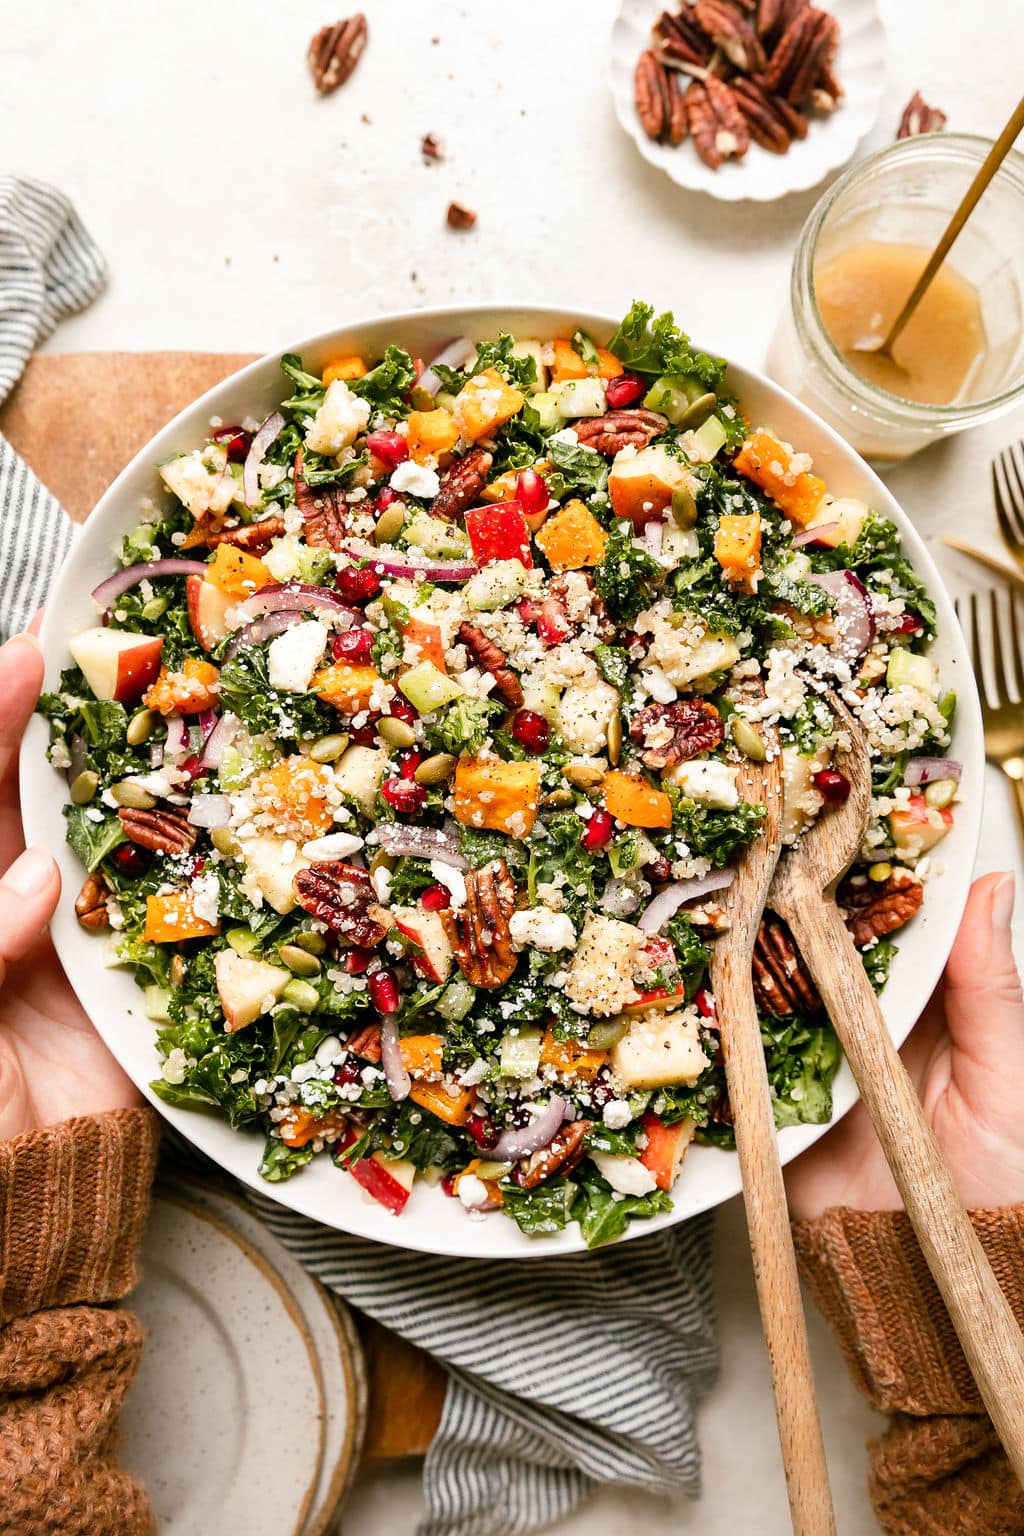 Two hands holding large white serving bowl filled with Harvest Salad with quinoa and butternut quash, wooden serving spoons in salad.